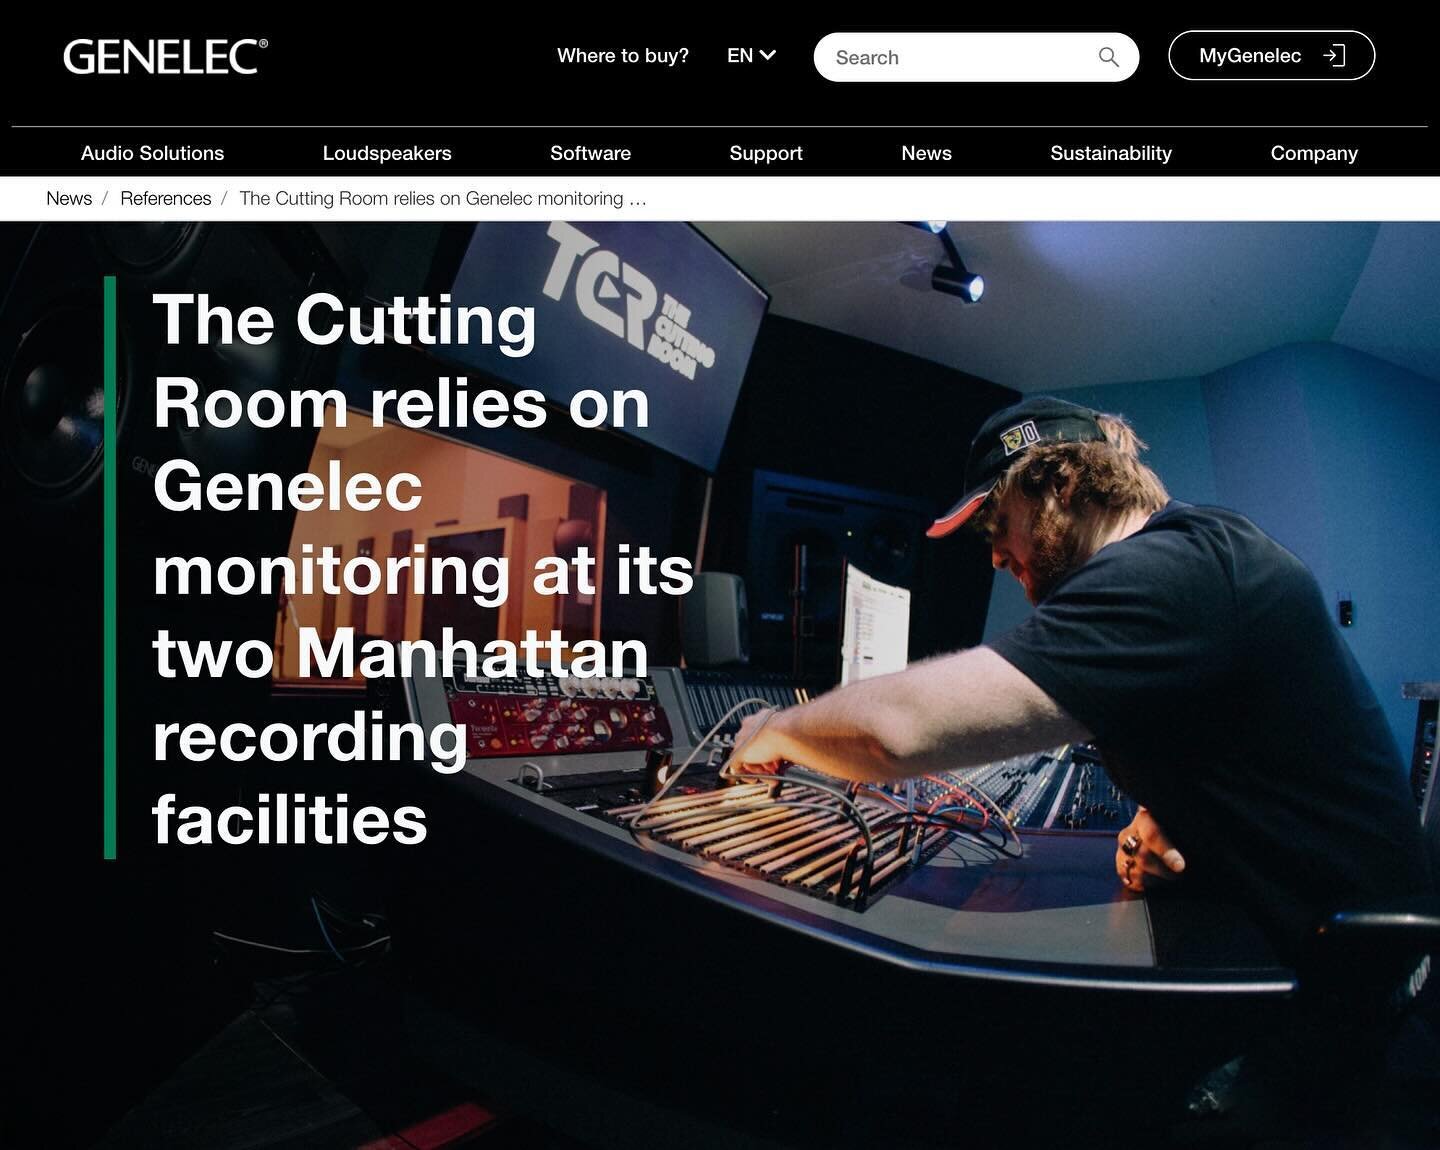 We sat down with the good people at @genelec_usa to talk about our new location in Chelsea, what it means to work with all different types of clients, and the crucial role that our Genelec mains play in that. Check out the full article on genelec.com